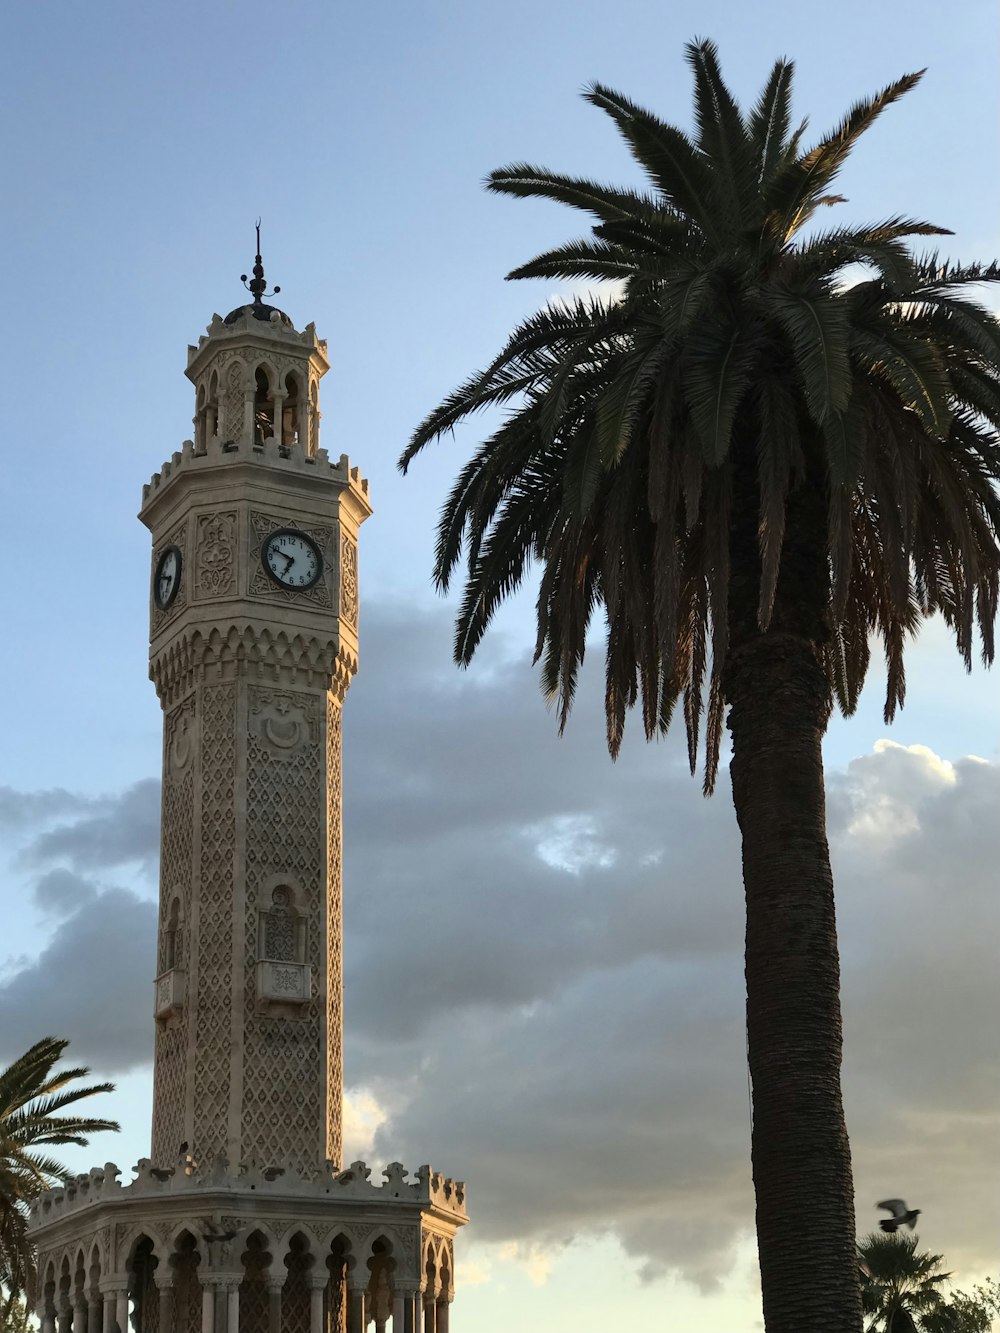 a tall clock tower sitting next to a palm tree